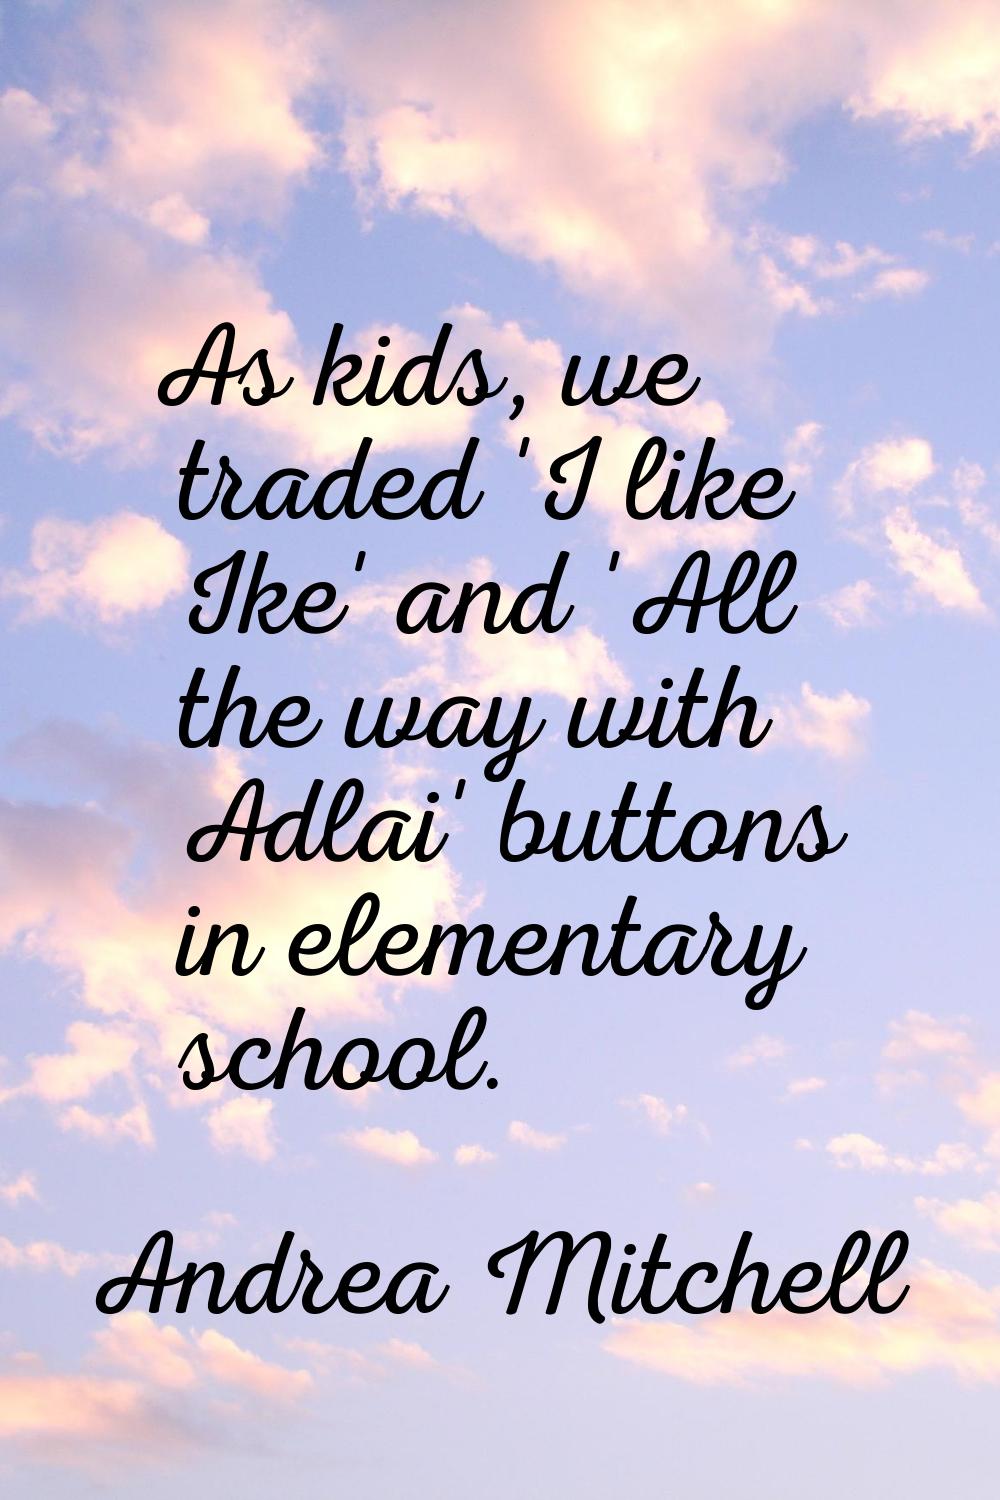 As kids, we traded 'I like Ike' and 'All the way with Adlai' buttons in elementary school.